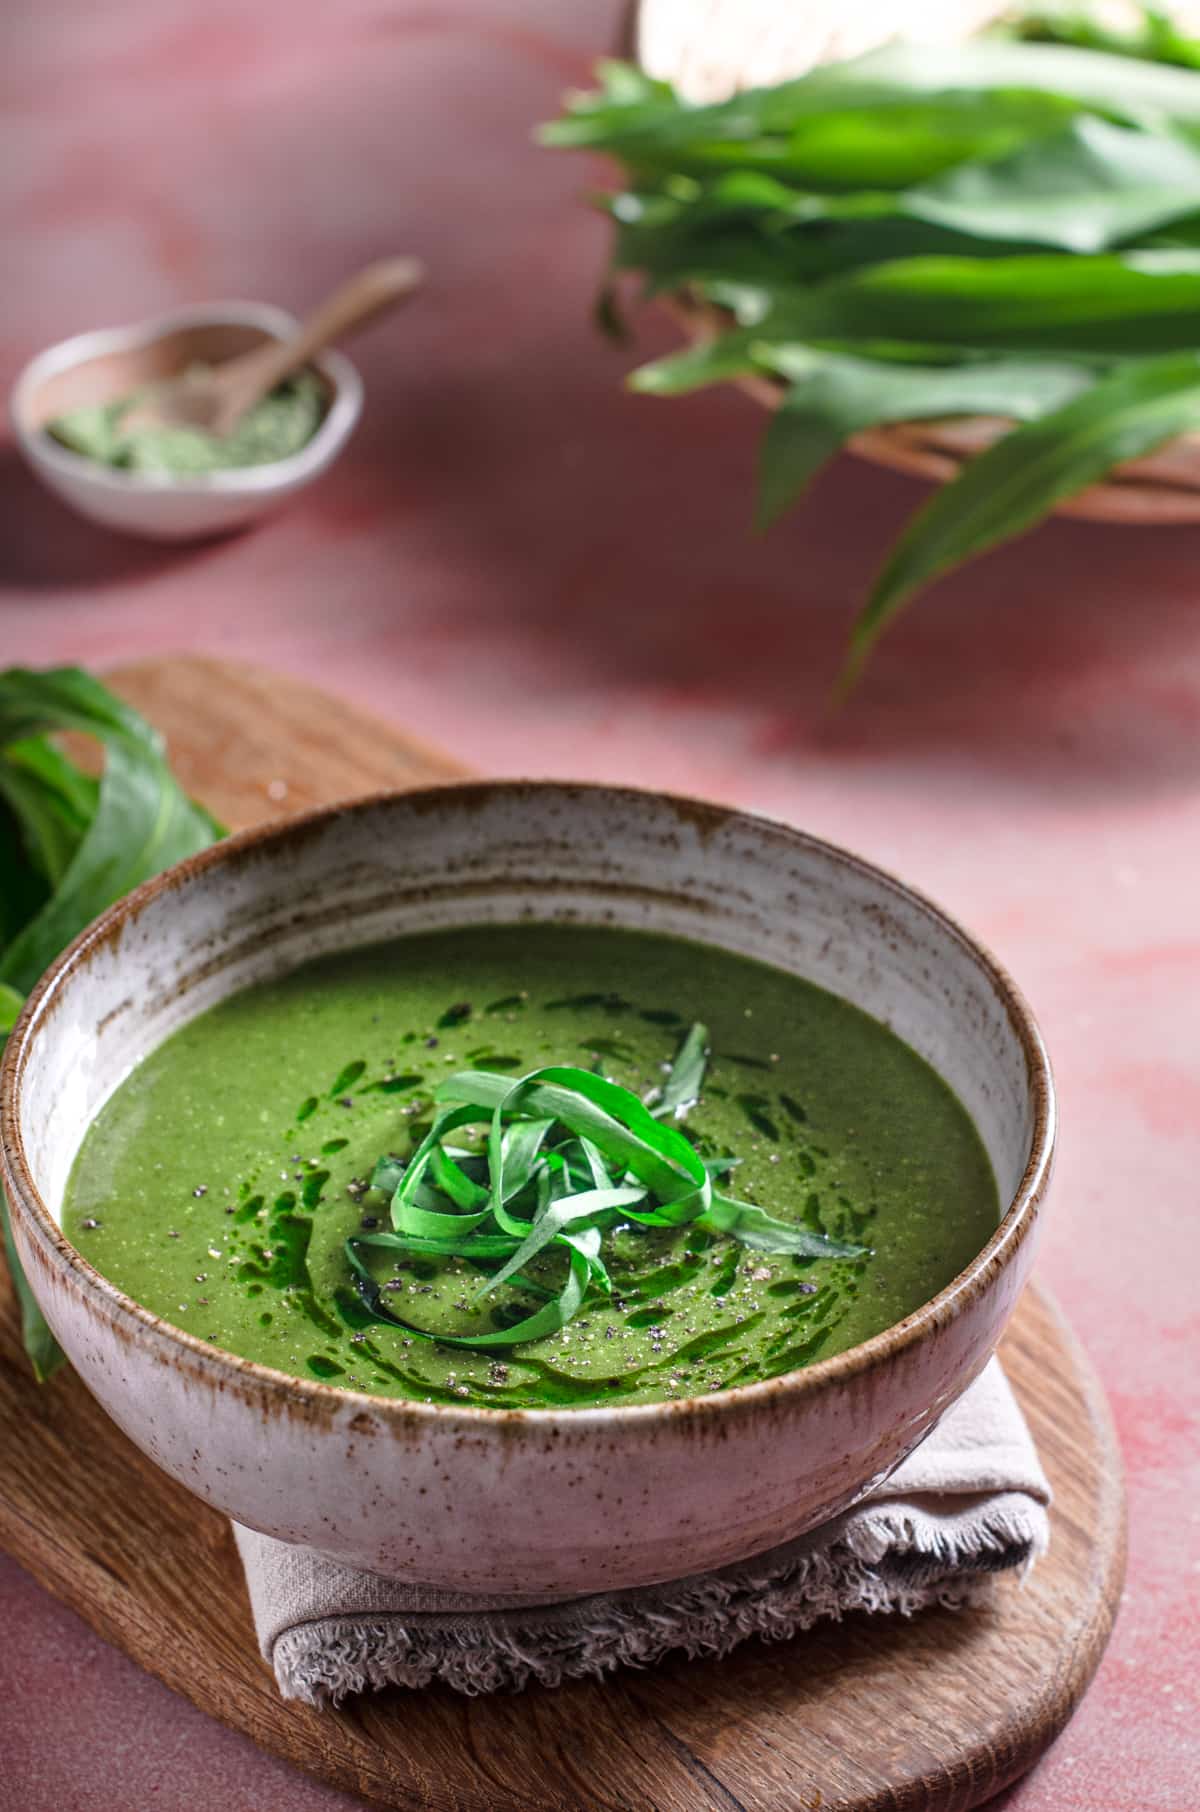 A vibrant green wild garlic soup with fresh picked wild garlic to the back all sat on a pink table top and a wooden board.